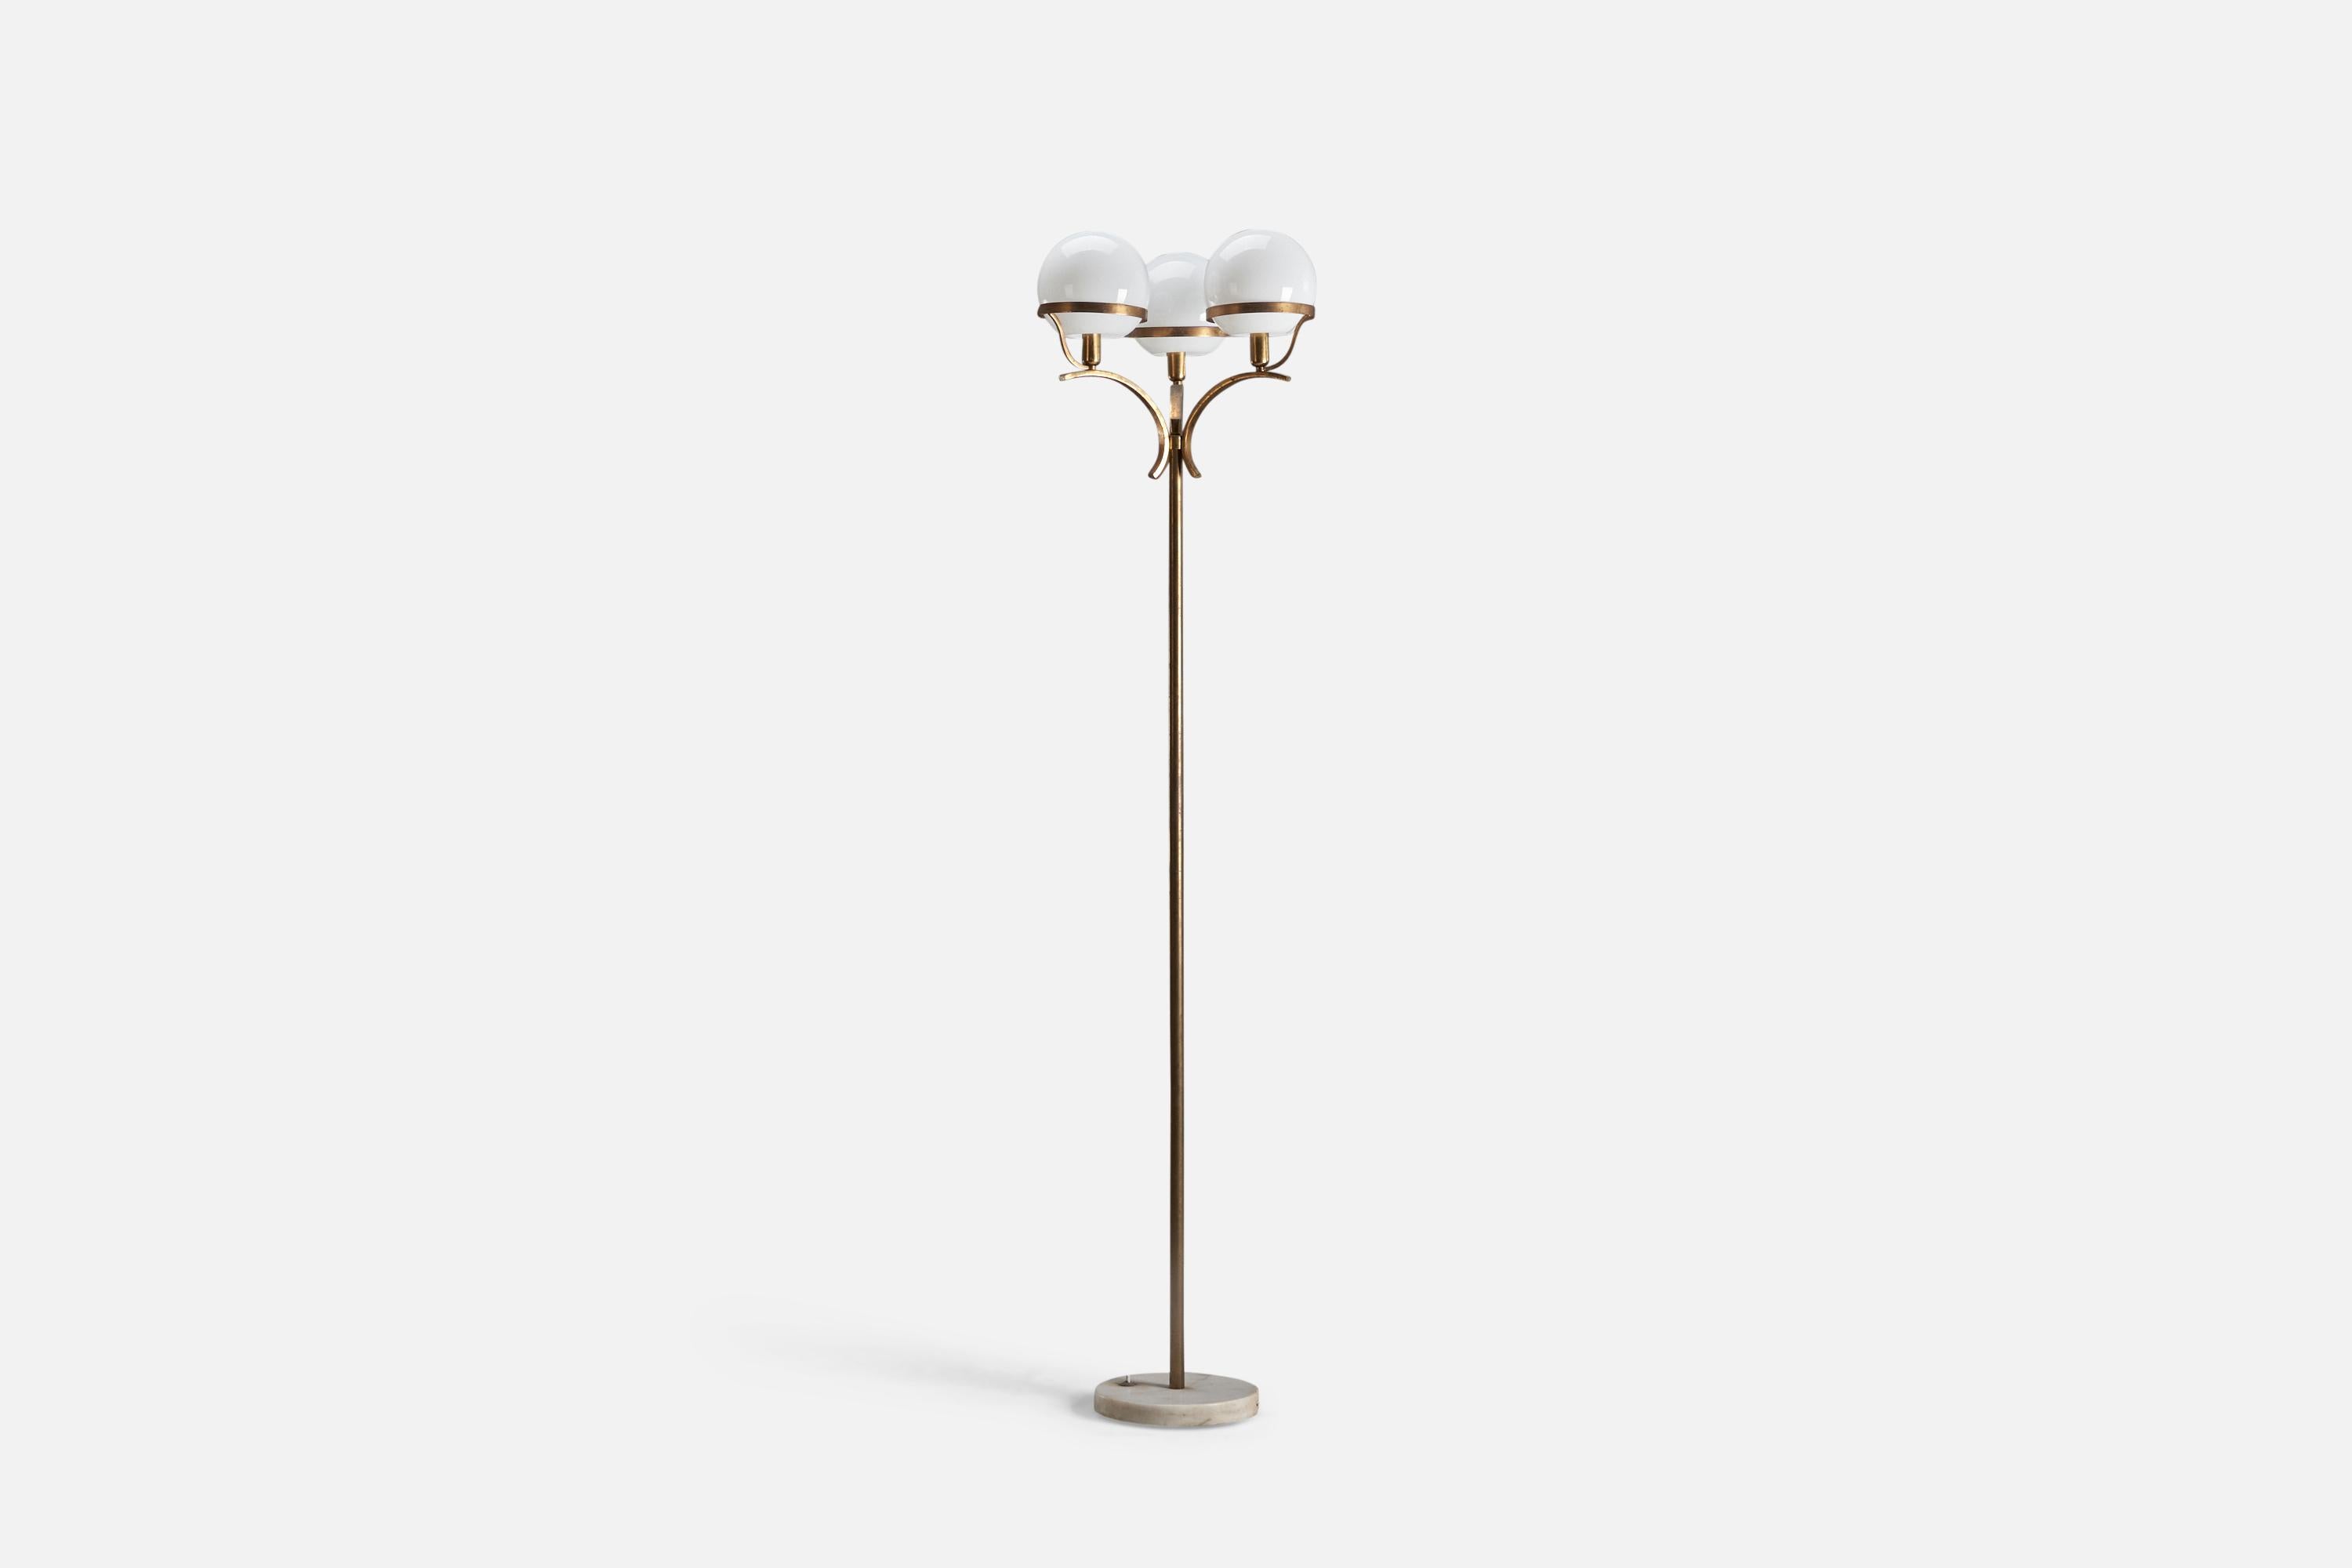 A brass, marble and glass floor lamp designed and produced by an Italian Designer, Italy, 1950s.

Sockets take E-14 bulbs.

There is no maximum wattage stated on the fixture.